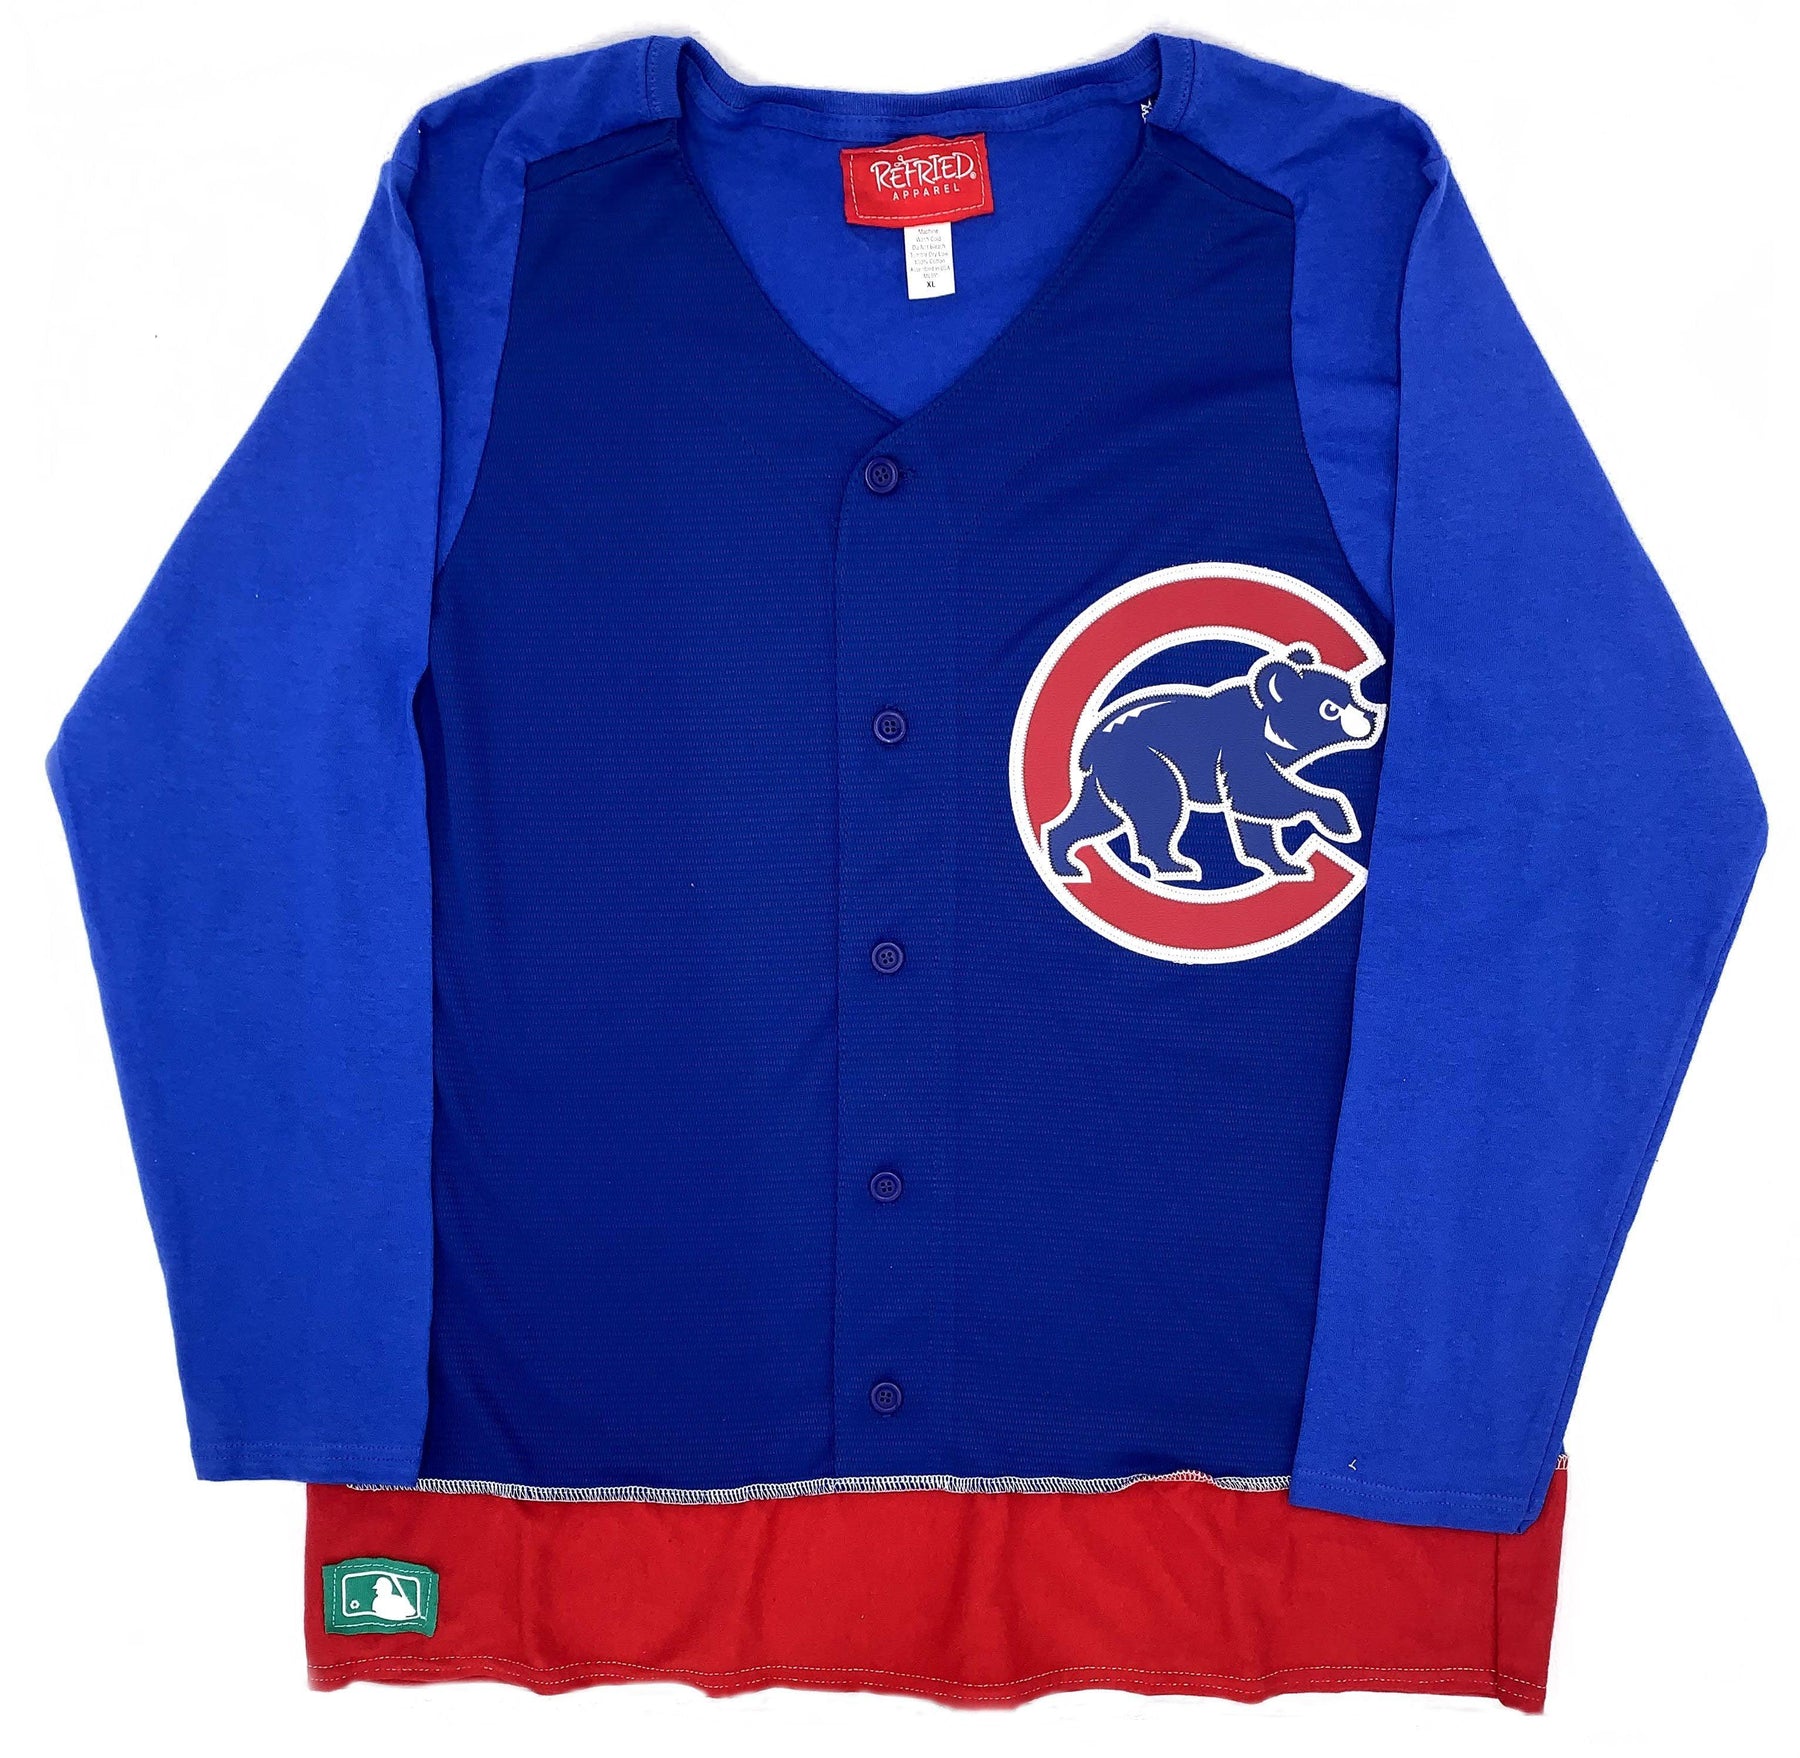 New Era Women's White, Royal Chicago Cubs Lace-Up Long Sleeve T